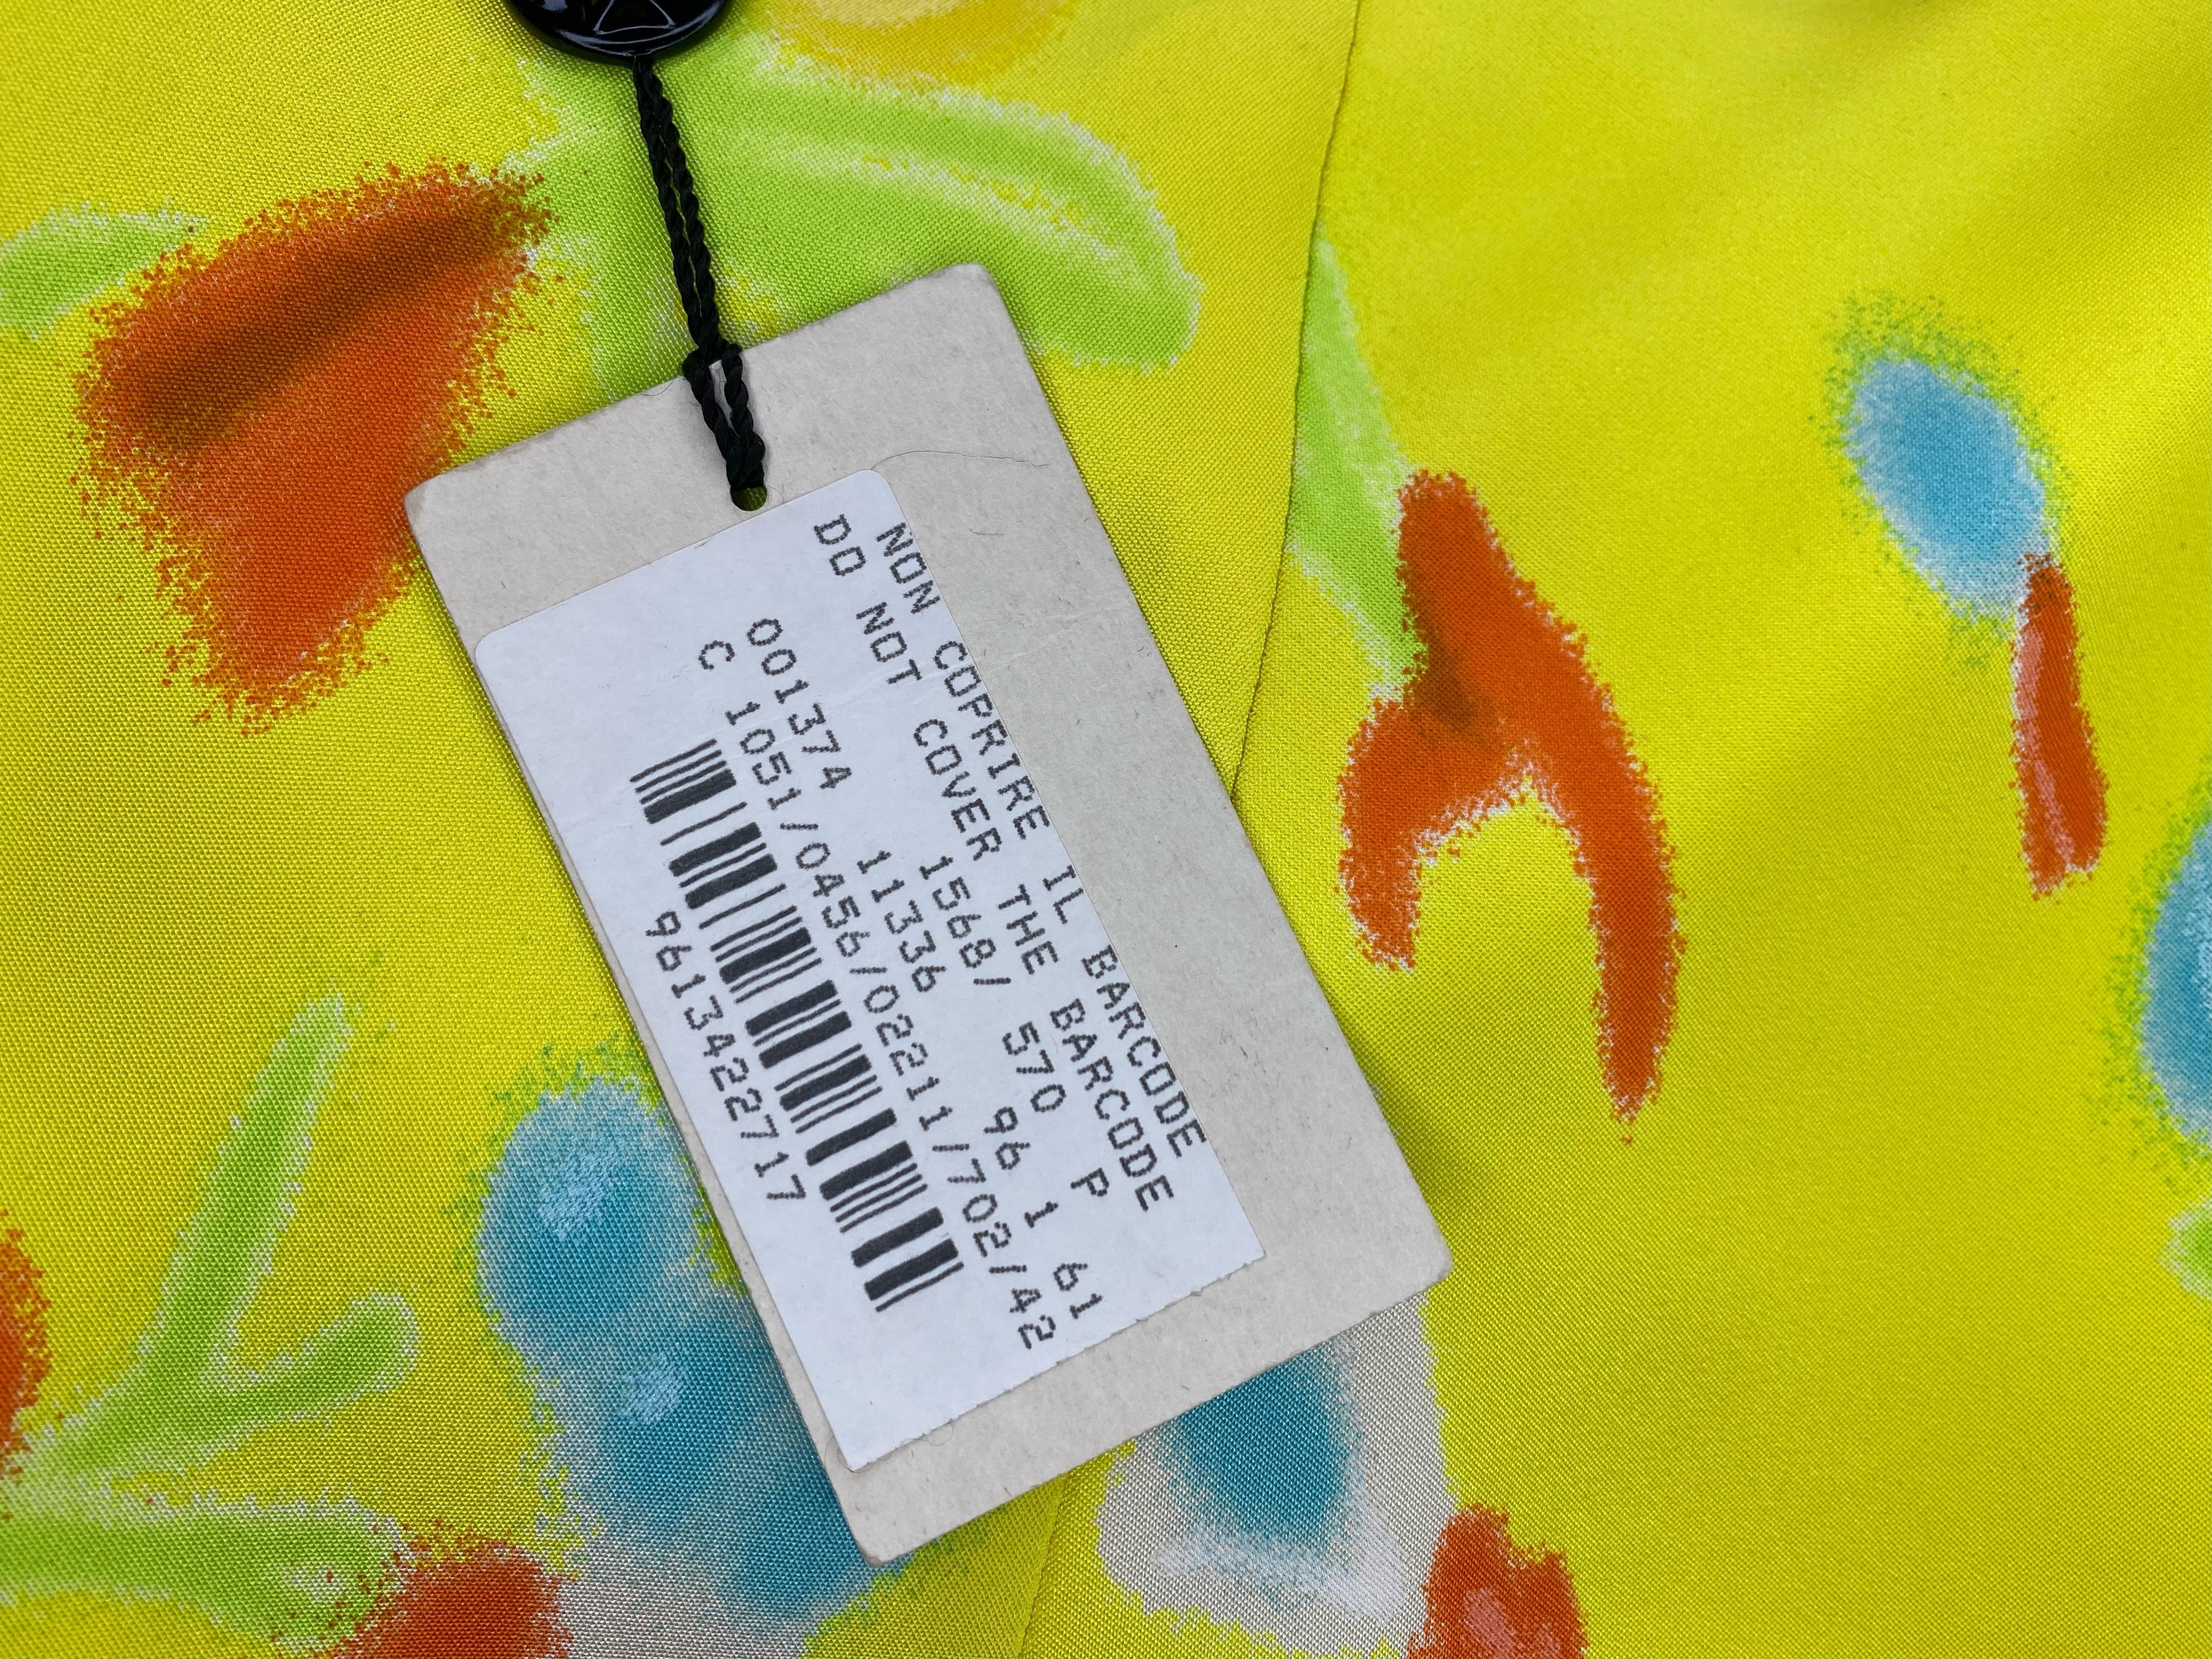 NWT S/S 1996 Gianni Versace Couture Neon Yellow Graffiti Floral Print Skirt For Sale 5